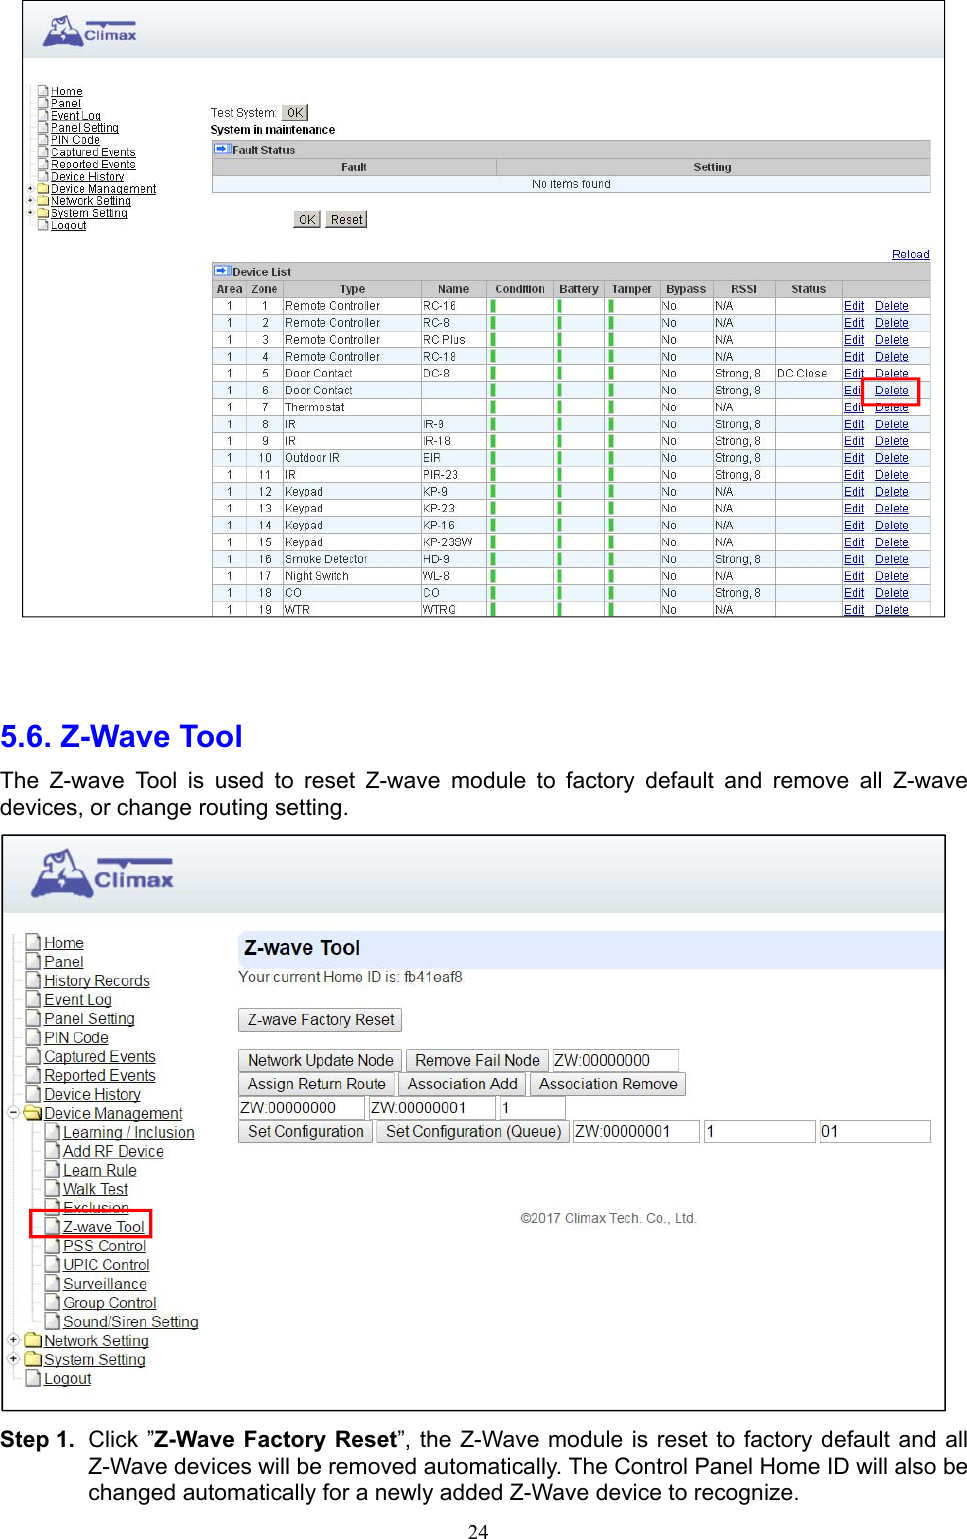  24   5.6. Z-Wave Tool     The  Z-wave  Tool  is  used  to  reset  Z-wave  module  to  factory  default  and  remove  all  Z-wave devices, or change routing setting.  Step 1.  Click ”Z-Wave Factory Reset”, the Z-Wave module is reset to factory default and all Z-Wave devices will be removed automatically. The Control Panel Home ID will also be changed automatically for a newly added Z-Wave device to recognize. 